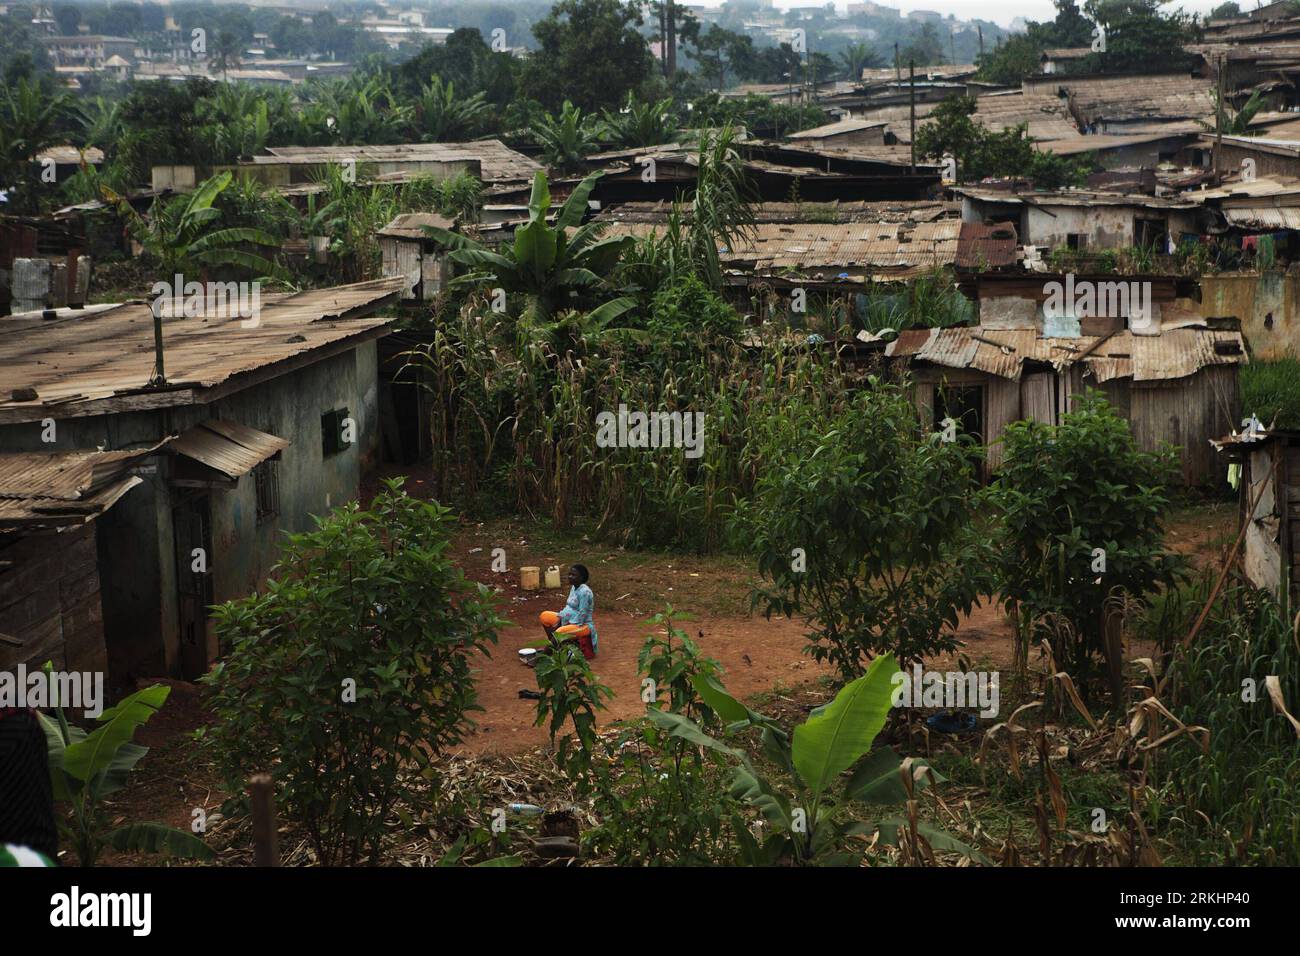 Bildnummer: 55888510  Datum: 17.08.2011  Copyright: imago/Xinhua (110902) -- YAOUNDE, Sept. 2 , 2011 (Xinhua) -- A pregnant woman does housework in a shanty town in Yaounde, capital of Cameroon, Aug. 17, 2011. Nearly 1.5 million live in Yaounde, the second largest city in Cameroon after the country s business capital Douala. (Xinhua/Shen Bohan) (lt) CAMEROON-YAOUNDE-DAILY LIFE PUBLICATIONxNOTxINxCHN Gesellschaft xbs Fotostory land leute 2011 quer o0 Totale, Haus, Wohnhaus, Hütte, Unterkunft    Bildnummer 55888510 Date 17 08 2011 Copyright Imago XINHUA  Yaounde Sept 2 2011 XINHUA a Pregnant Wom Stock Photo